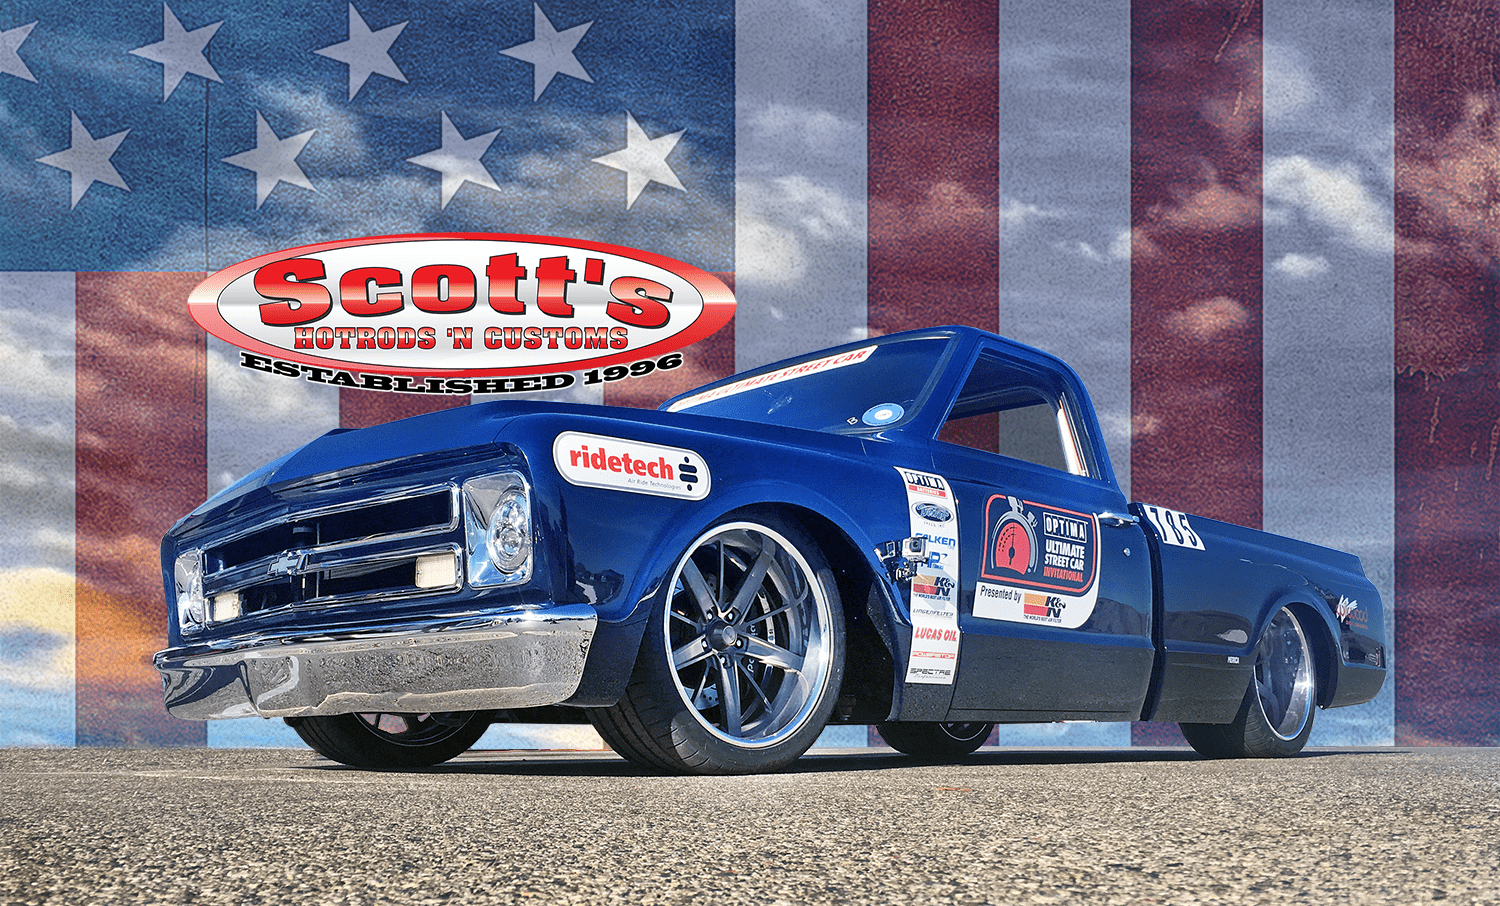 SCOTTS G10 AMERICA COVER PAGE